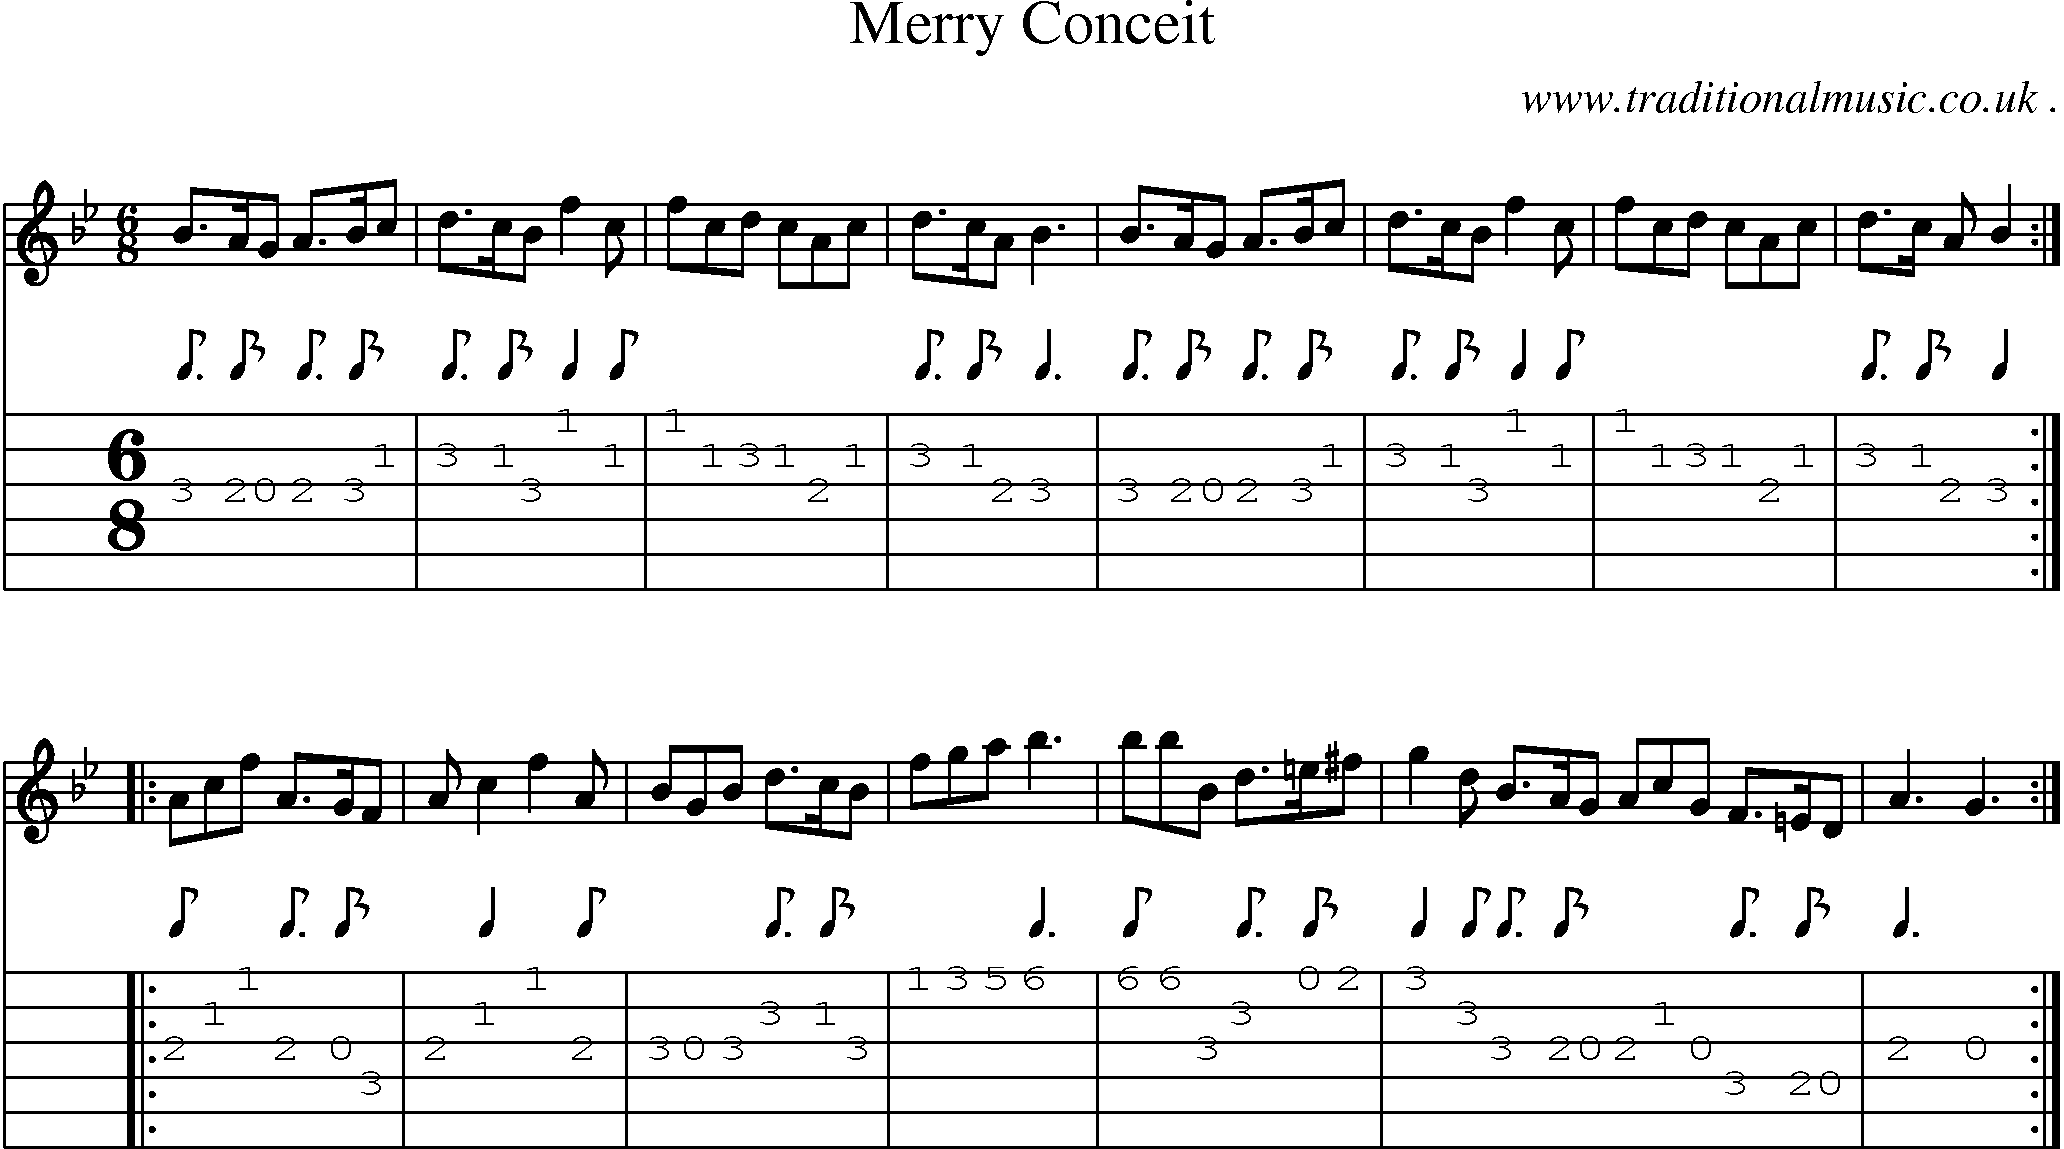 Sheet-Music and Guitar Tabs for Merry Conceit